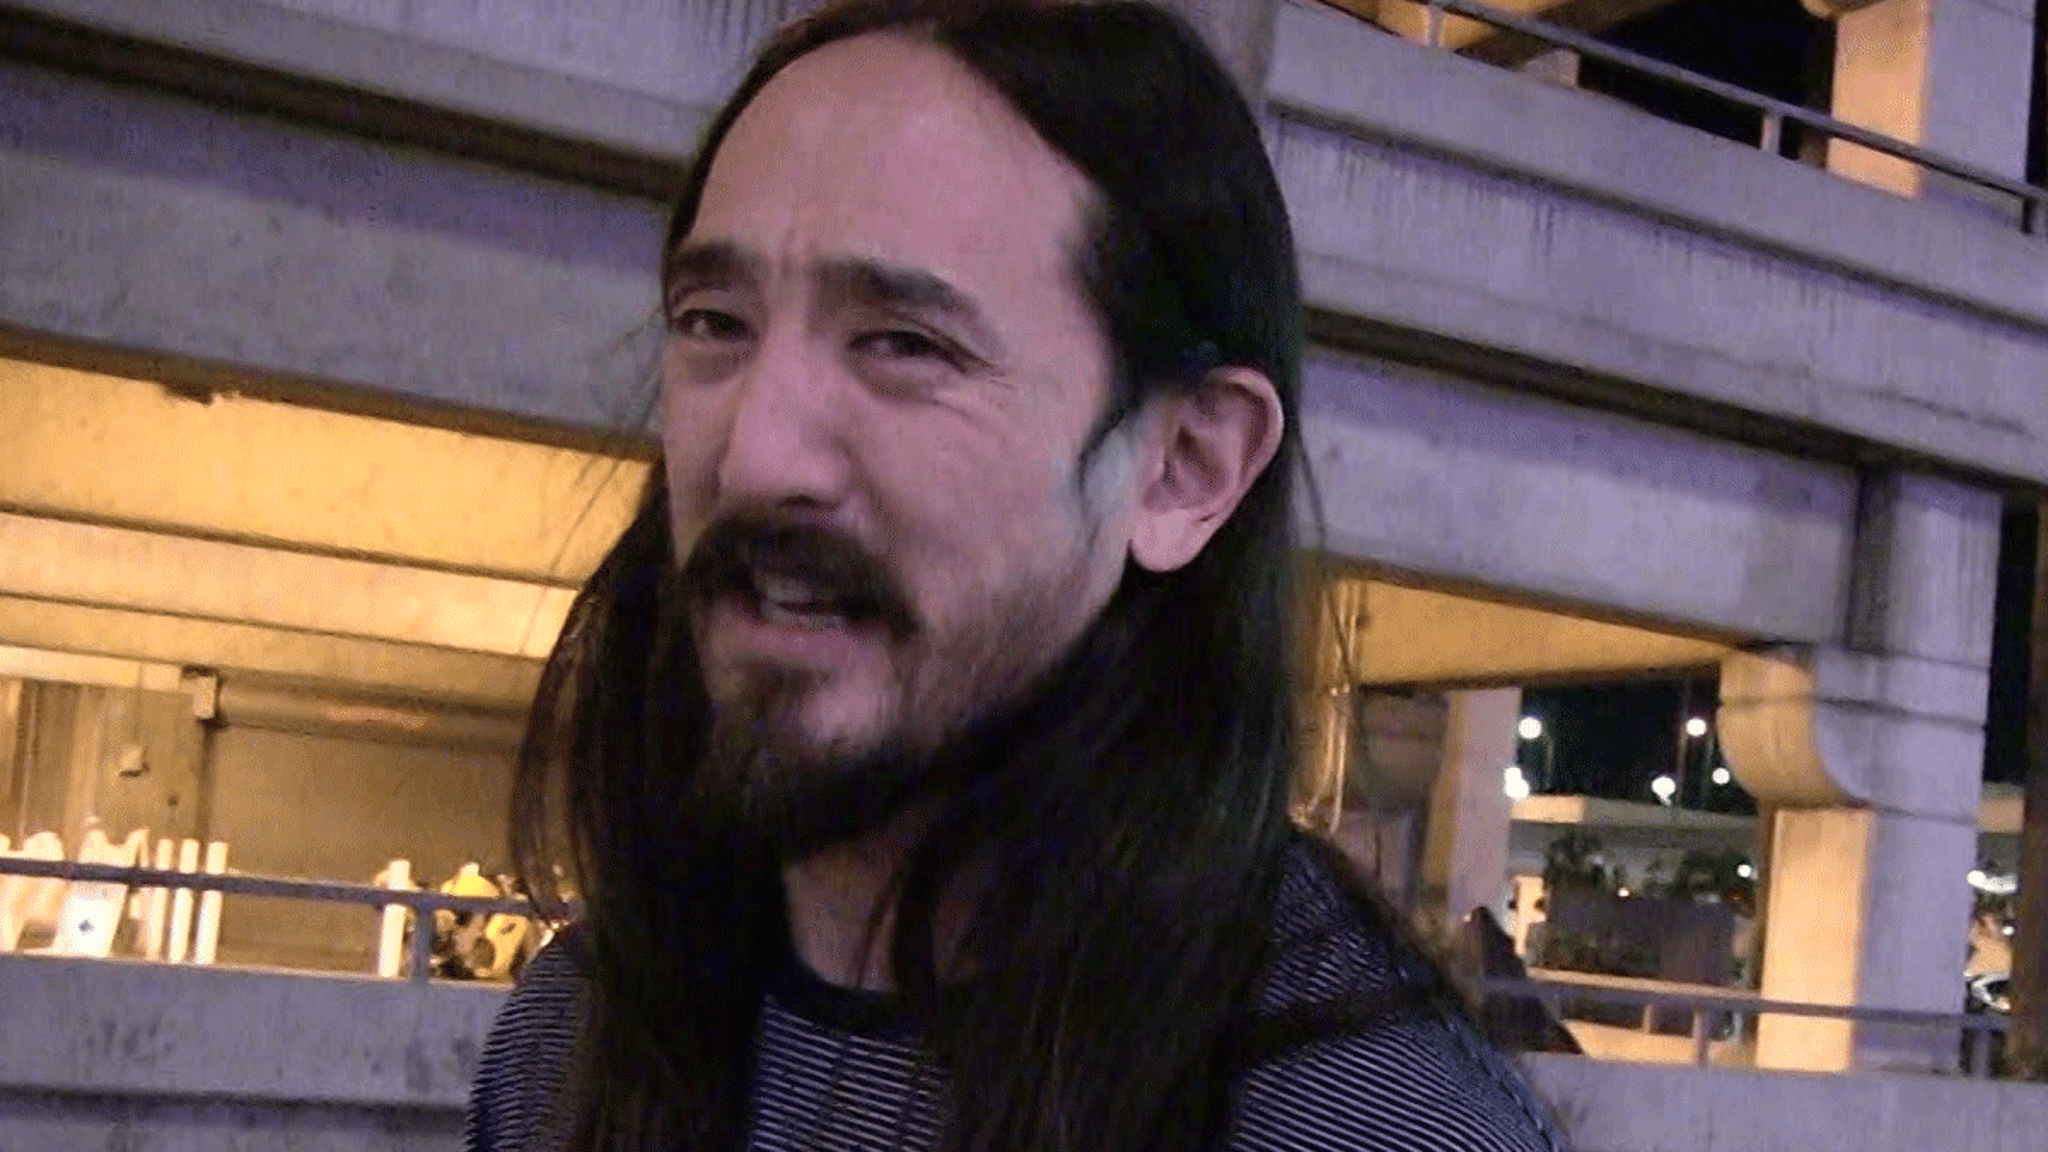 Old Steve Aoki Cake Video Surfaces, Wheelchair ‘Boy’ Wanted It